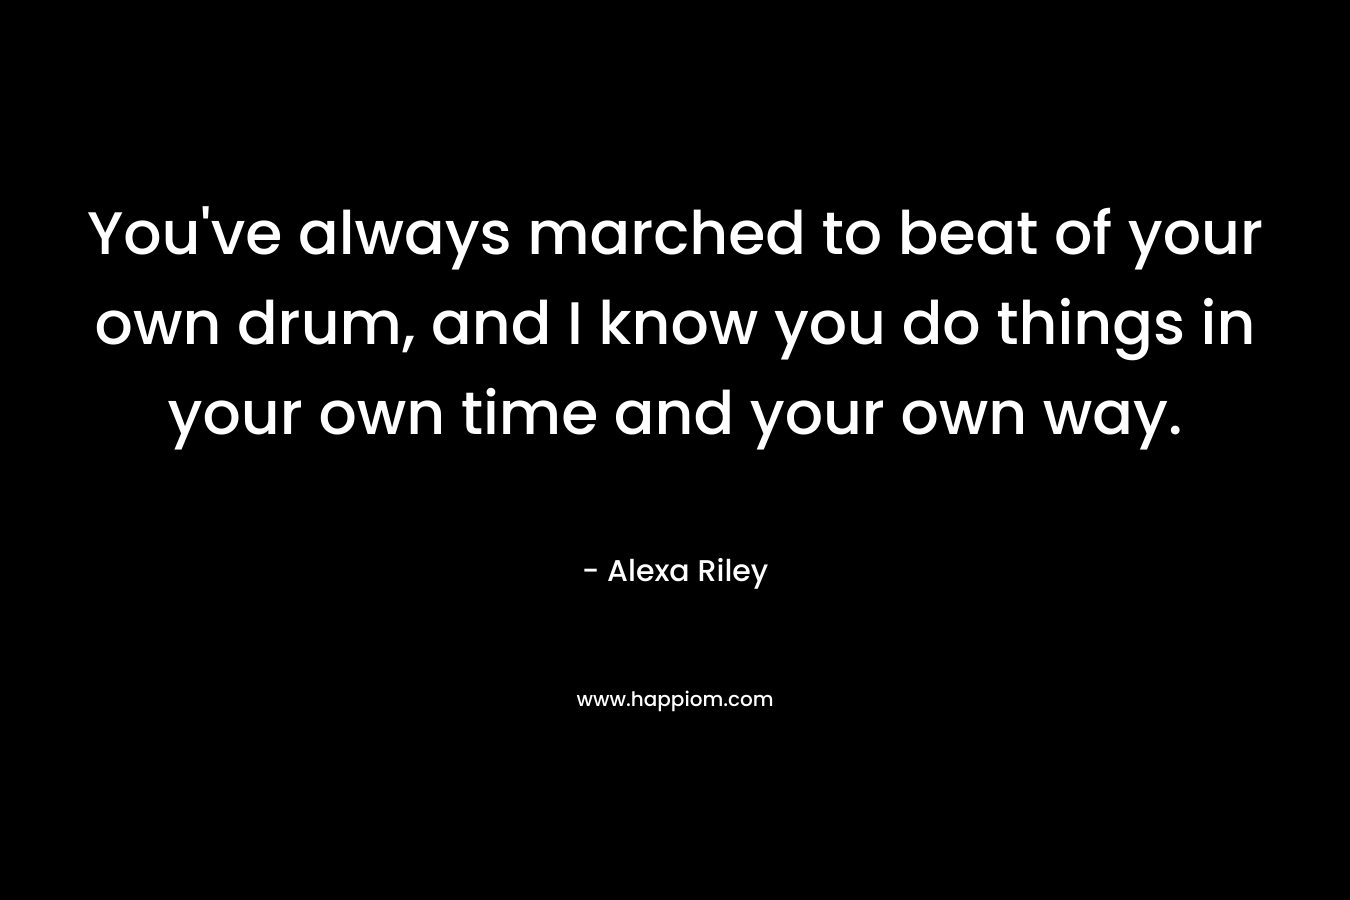 You’ve always marched to beat of your own drum, and I know you do things in your own time and your own way. – Alexa Riley